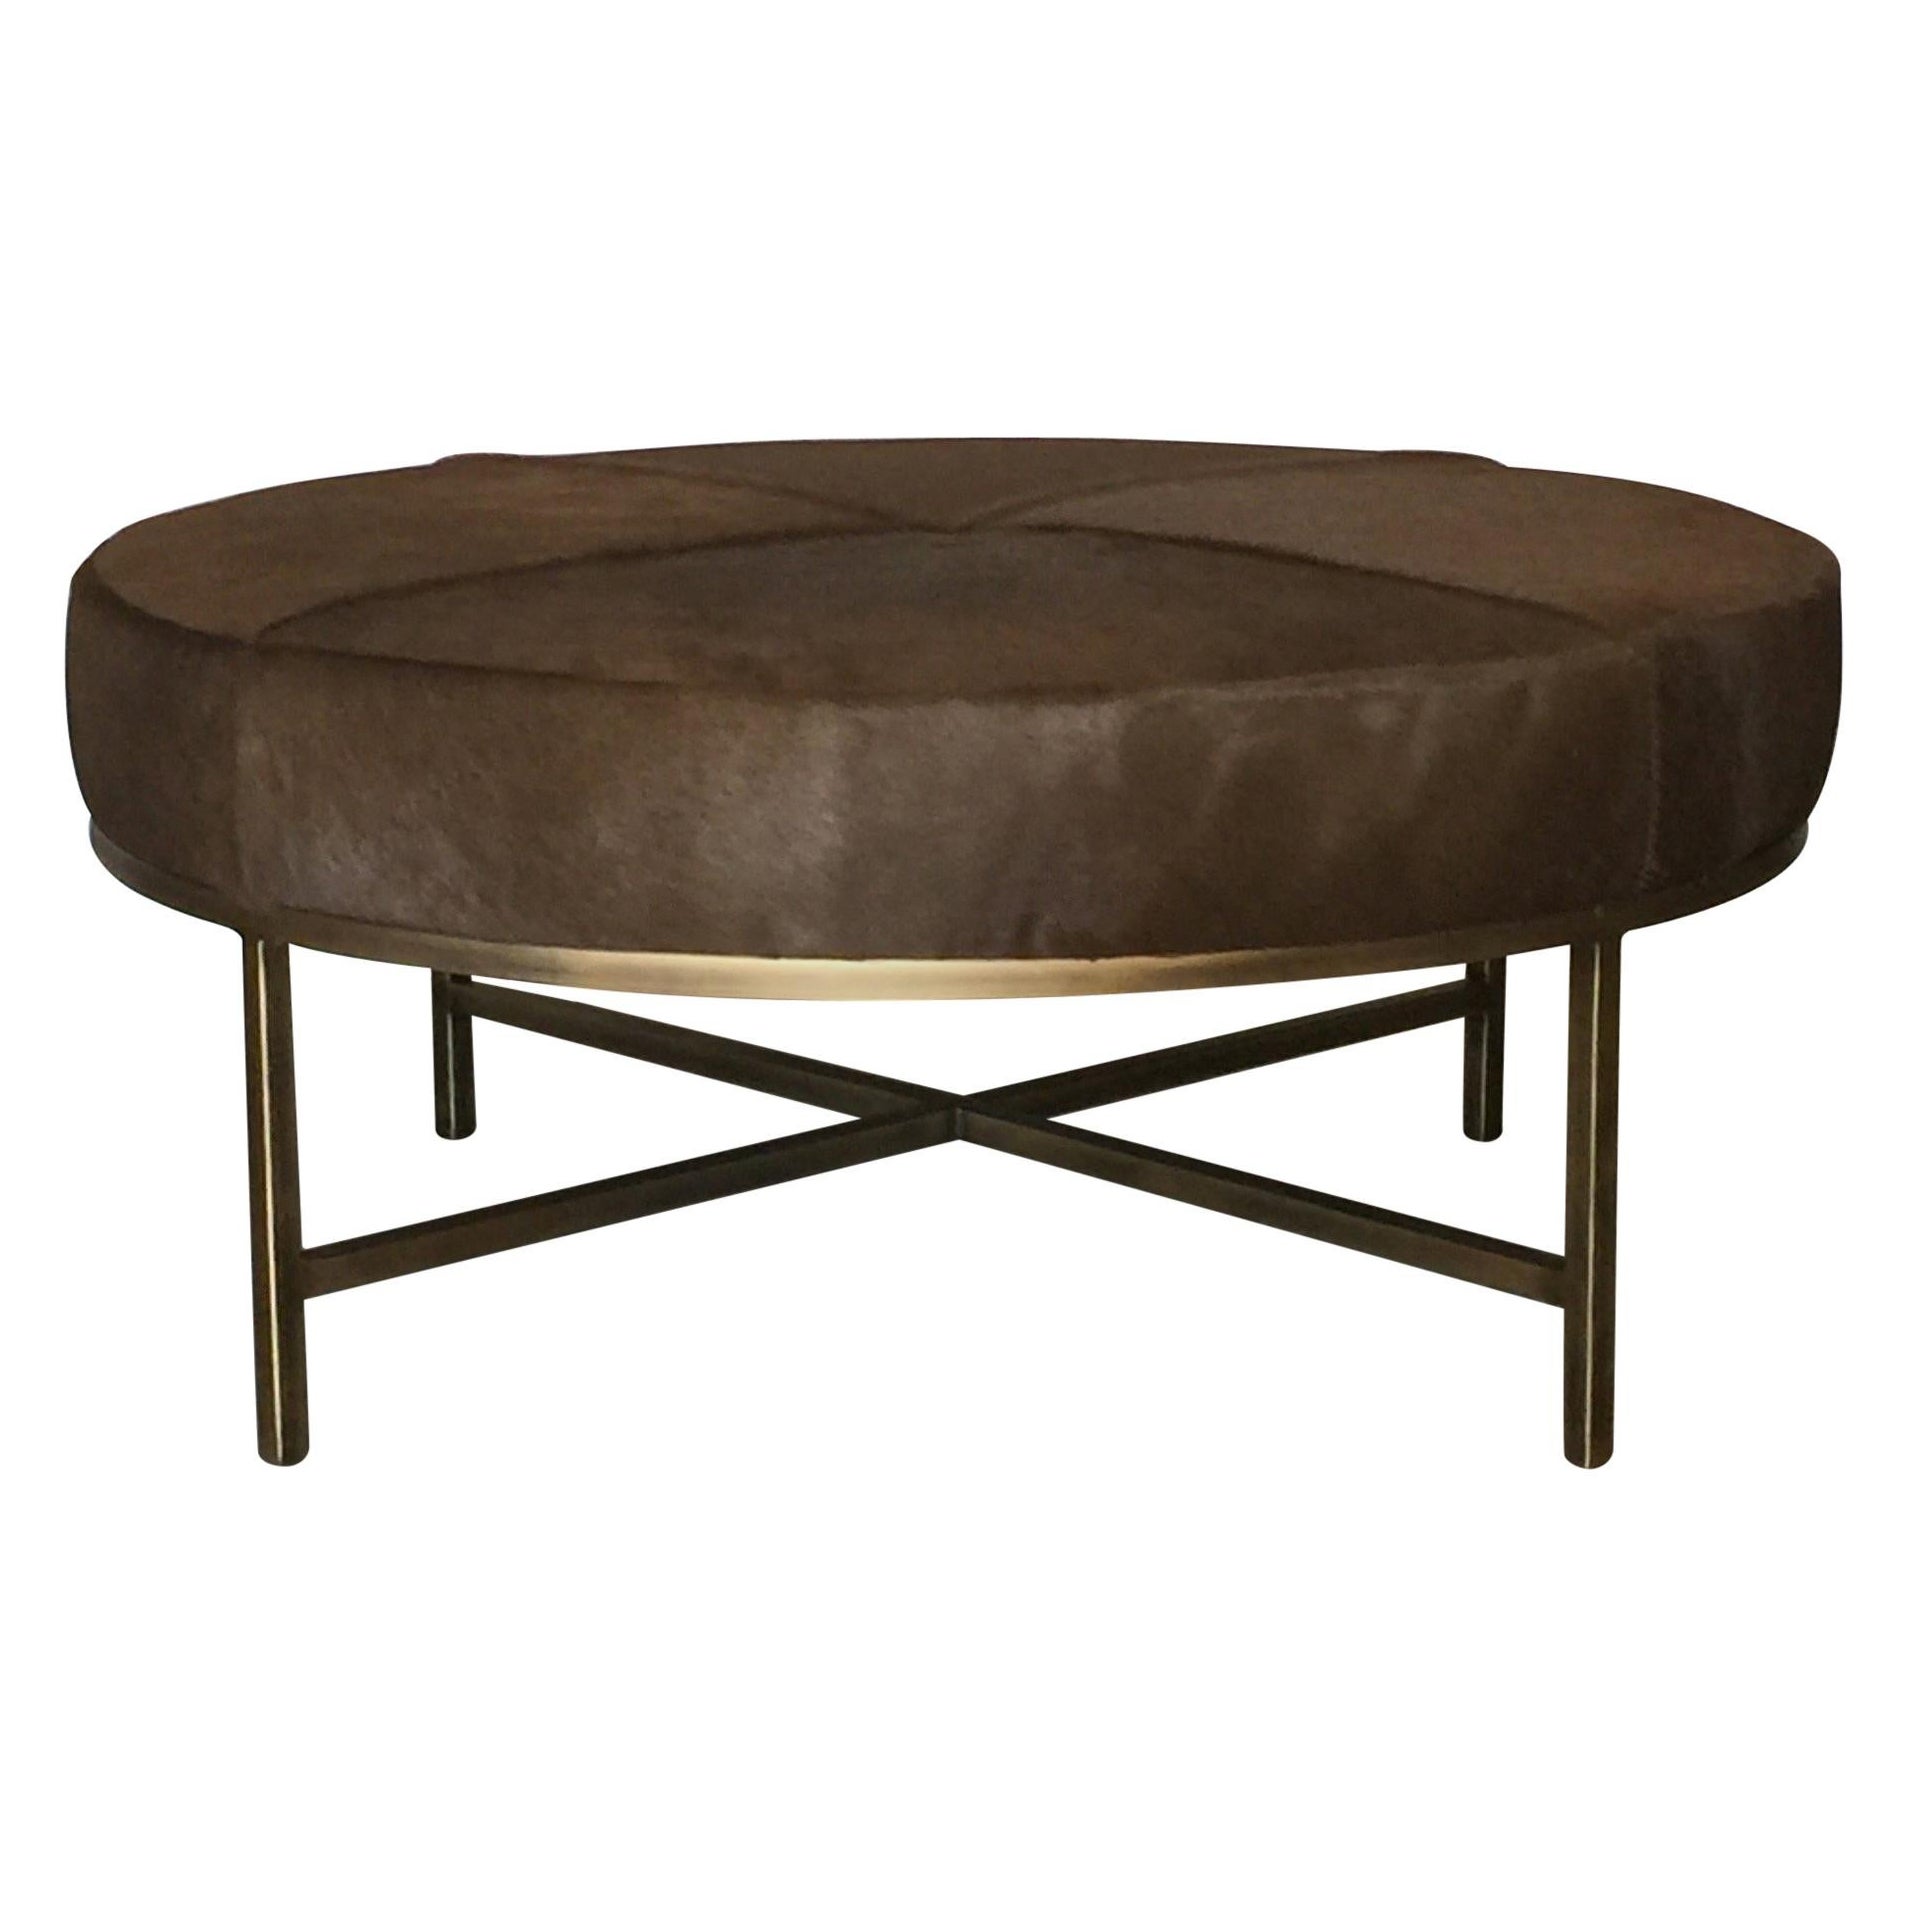 Medium 'Tambour' Antiqued Brass and Hide Ottoman by Design Frères